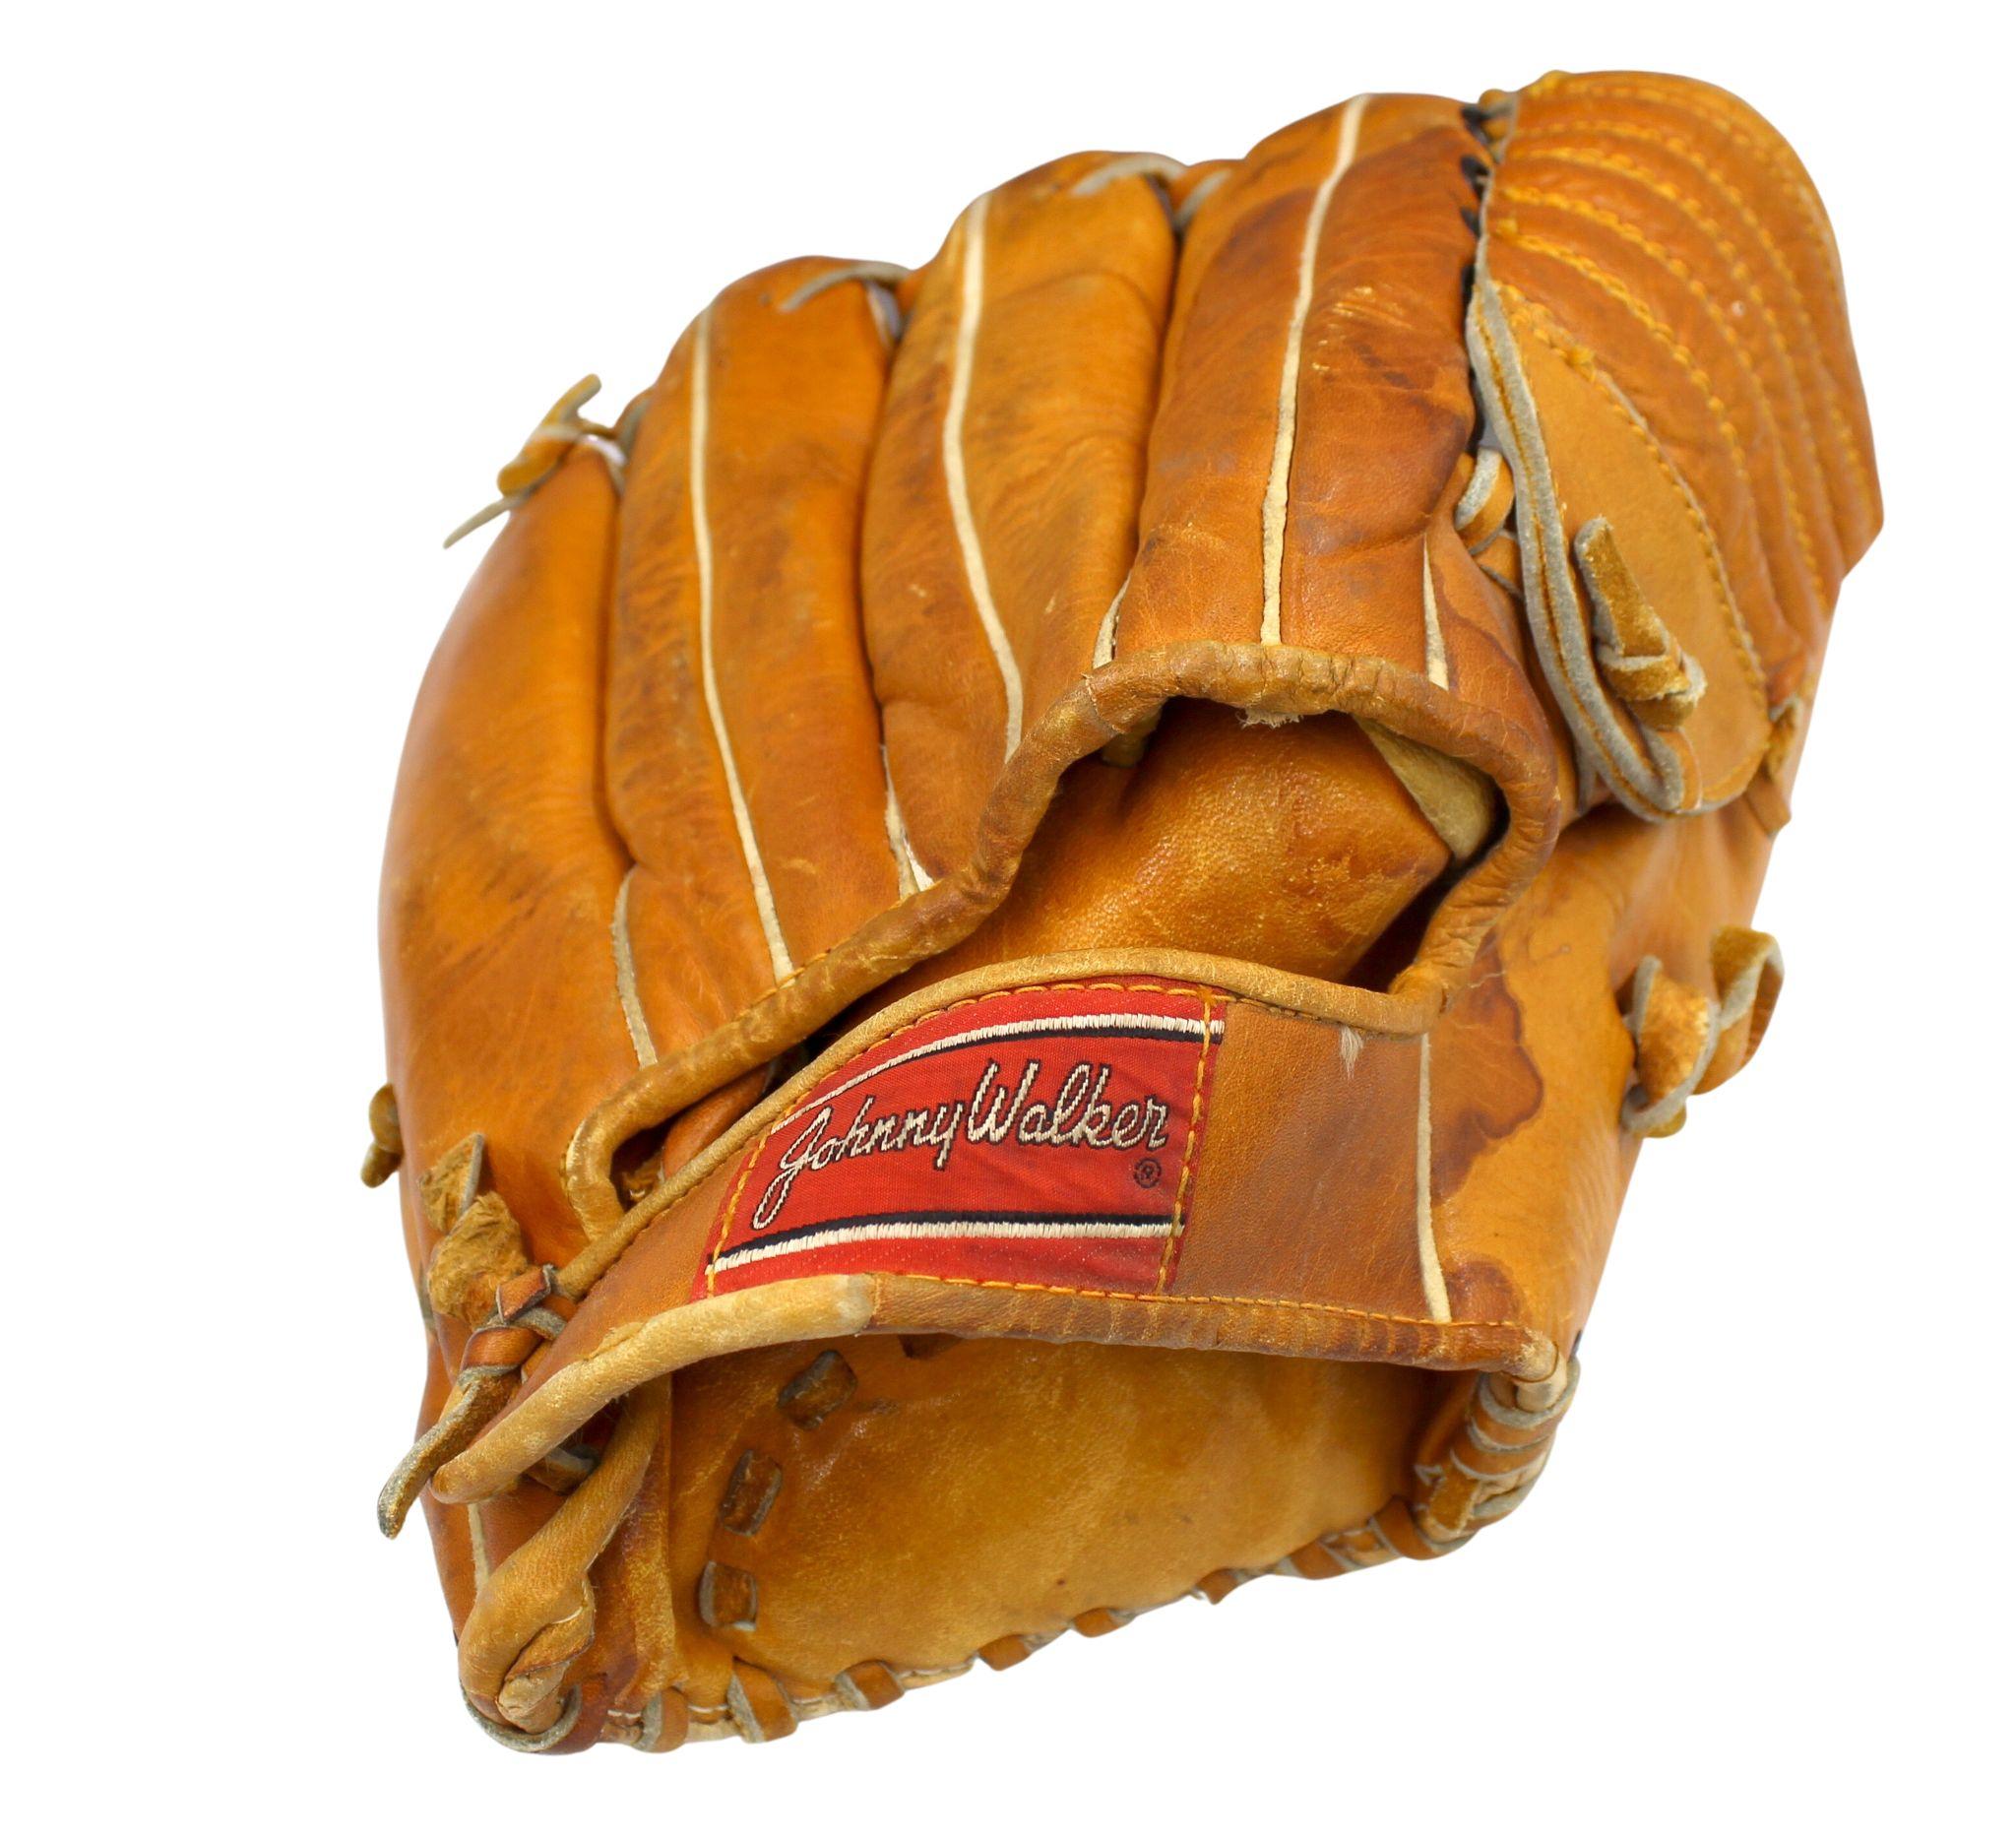 This is a vintage Johnny Walker baseball glove from the early 1960s . The glove has a barrel web design and laced fingers. The model number is visible along the heel pad of the glove “Johnny Walker Model No. FG-202.” It is stamped with “Pre-Formed